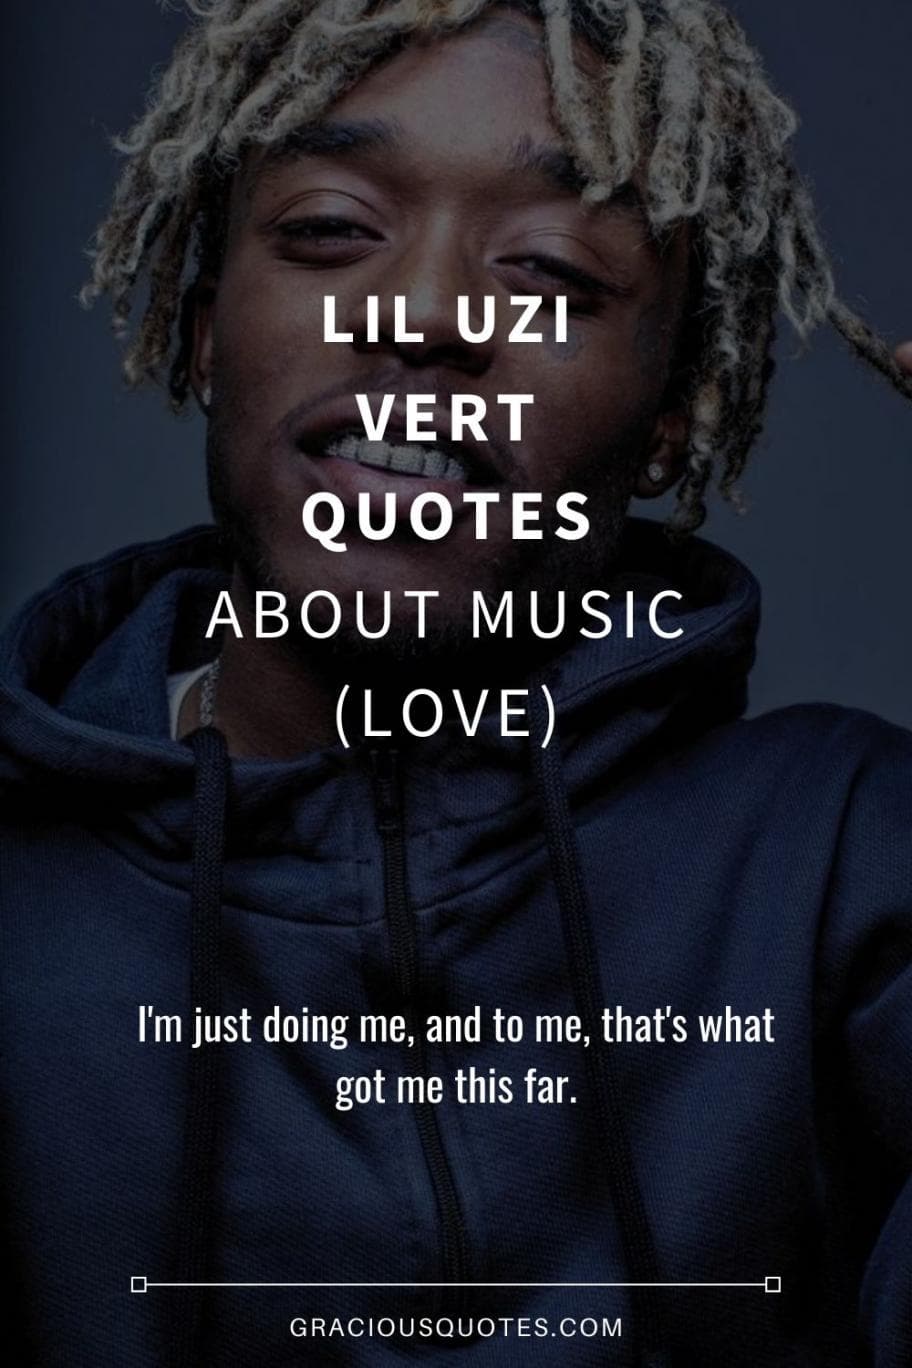 lil uzi vert quotes about music love gracious quotes